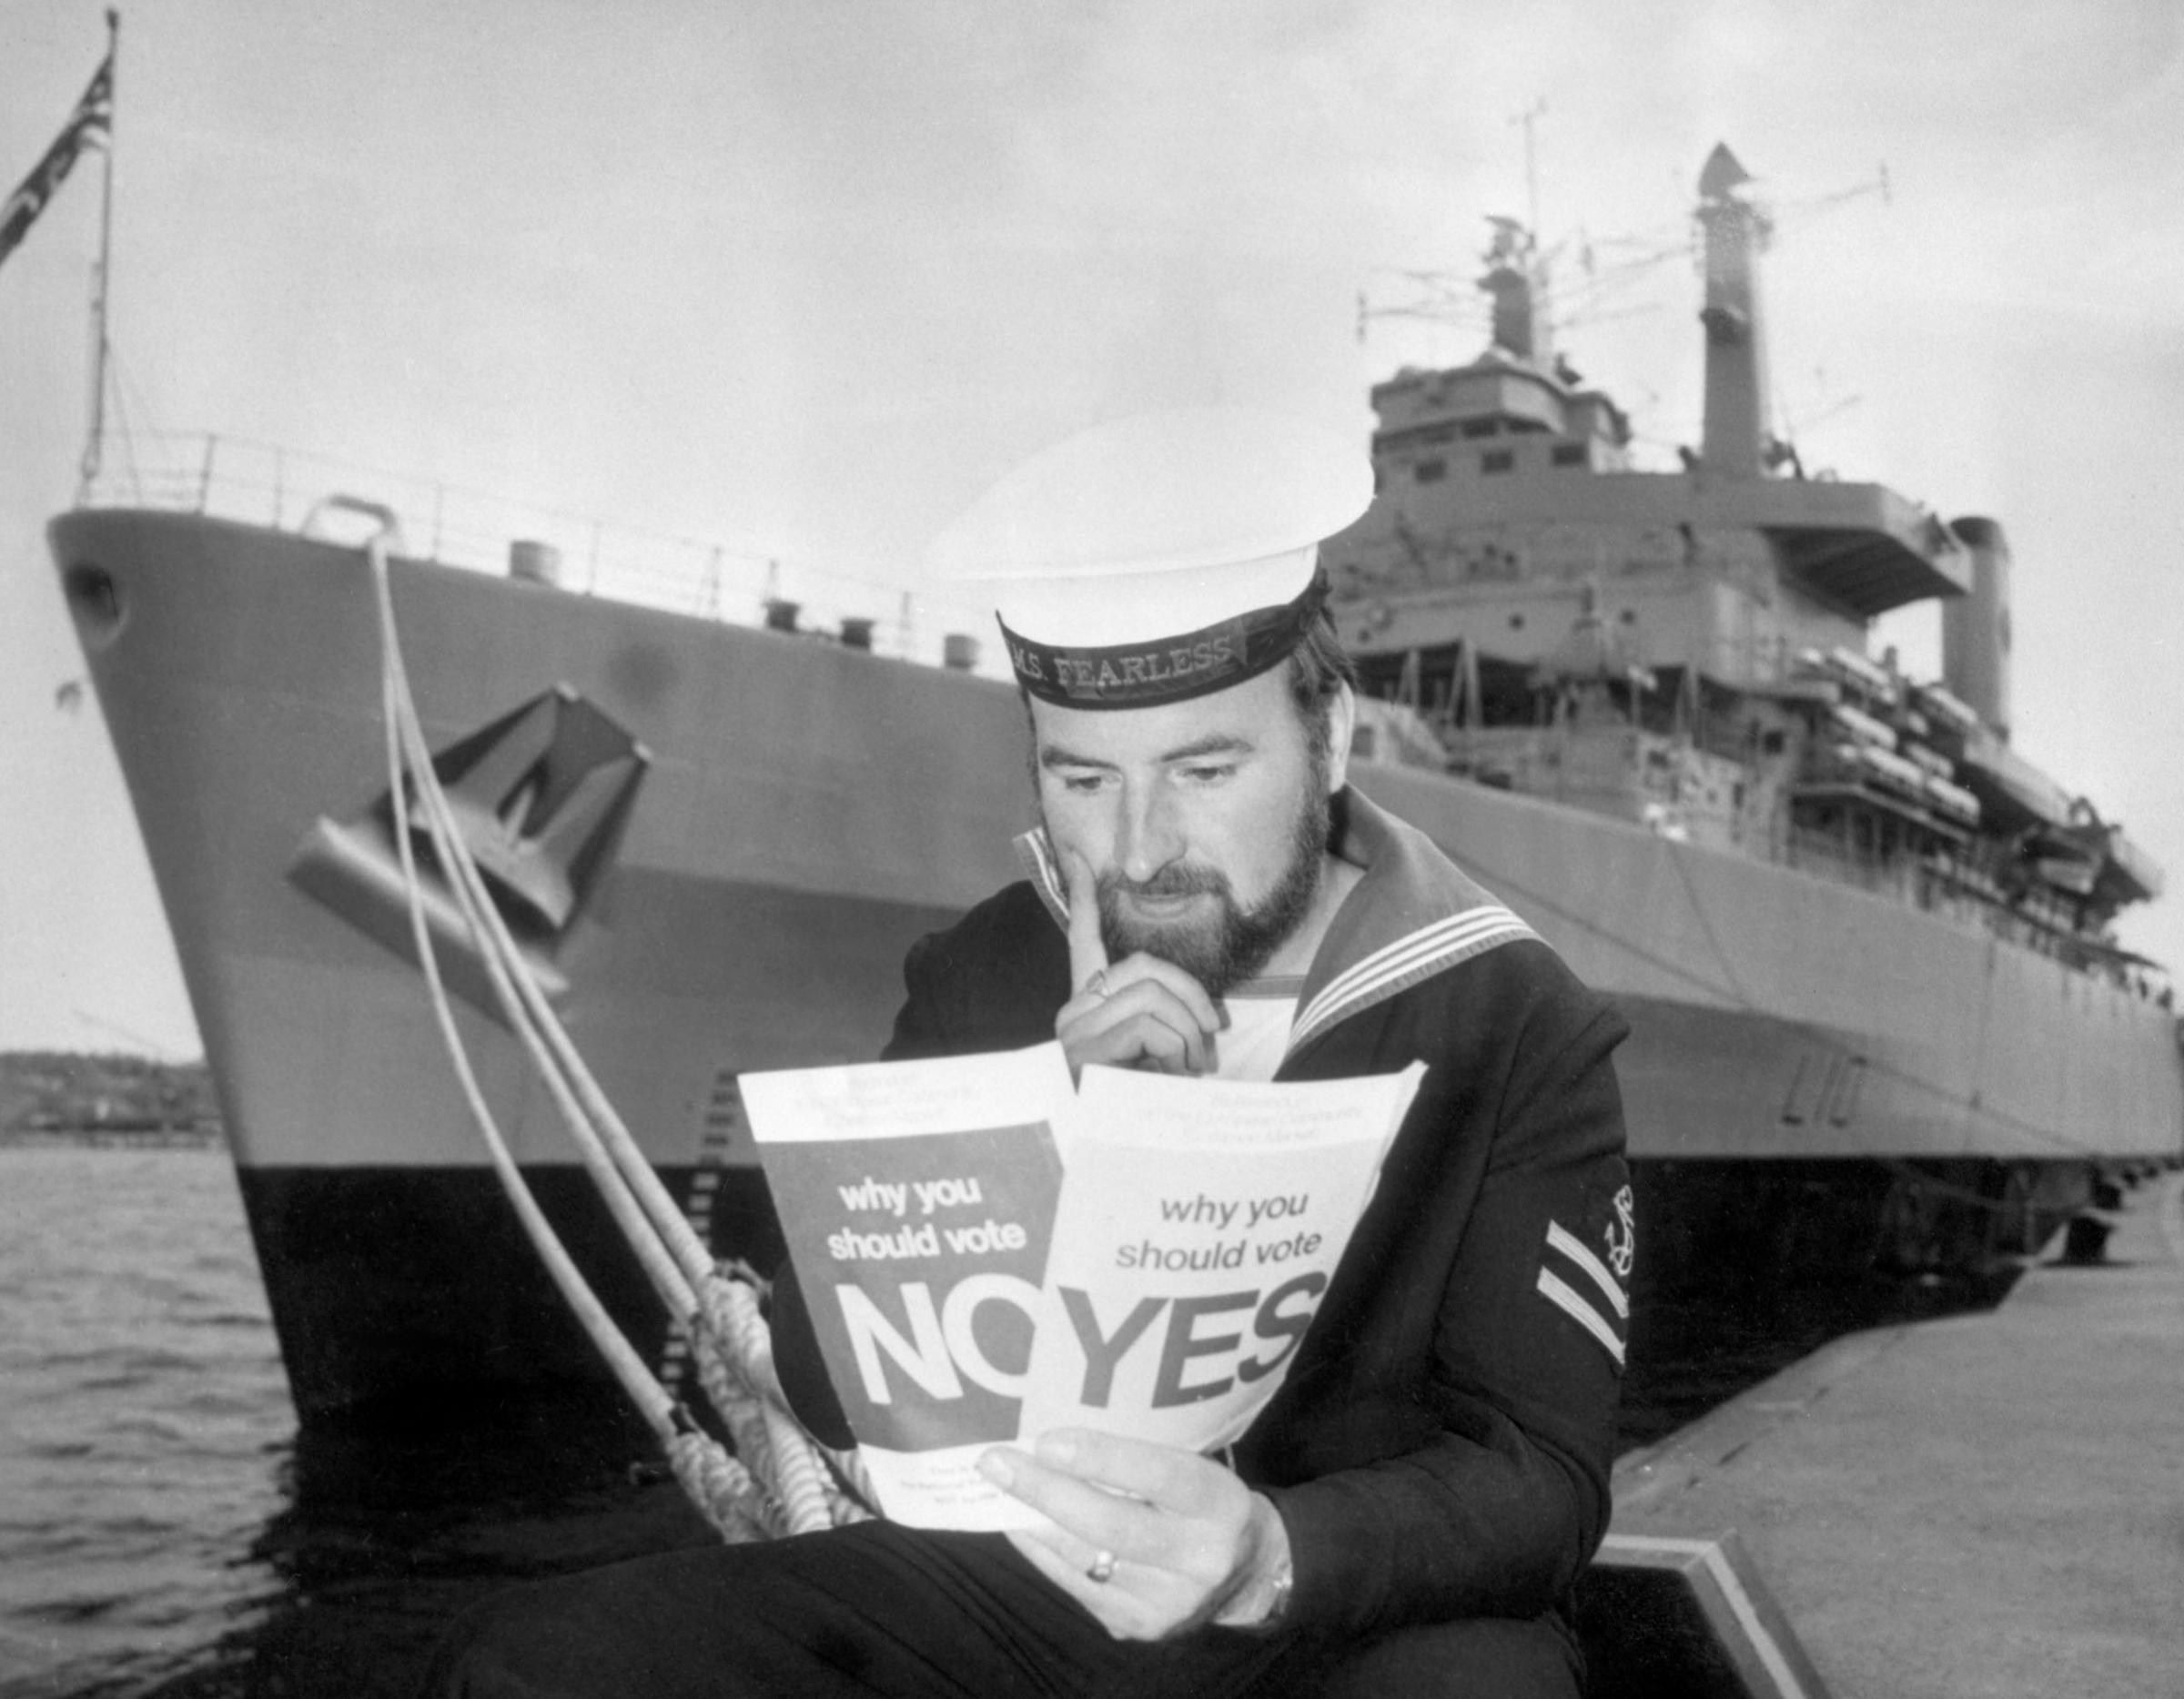 LREM Eric Littlehales, of Oswestry, Salop, ponders arguments for and against in the forthcoming National Referendum on the Common Market during a courtesy visit by HMS Fearless to Stockholm, 1975.